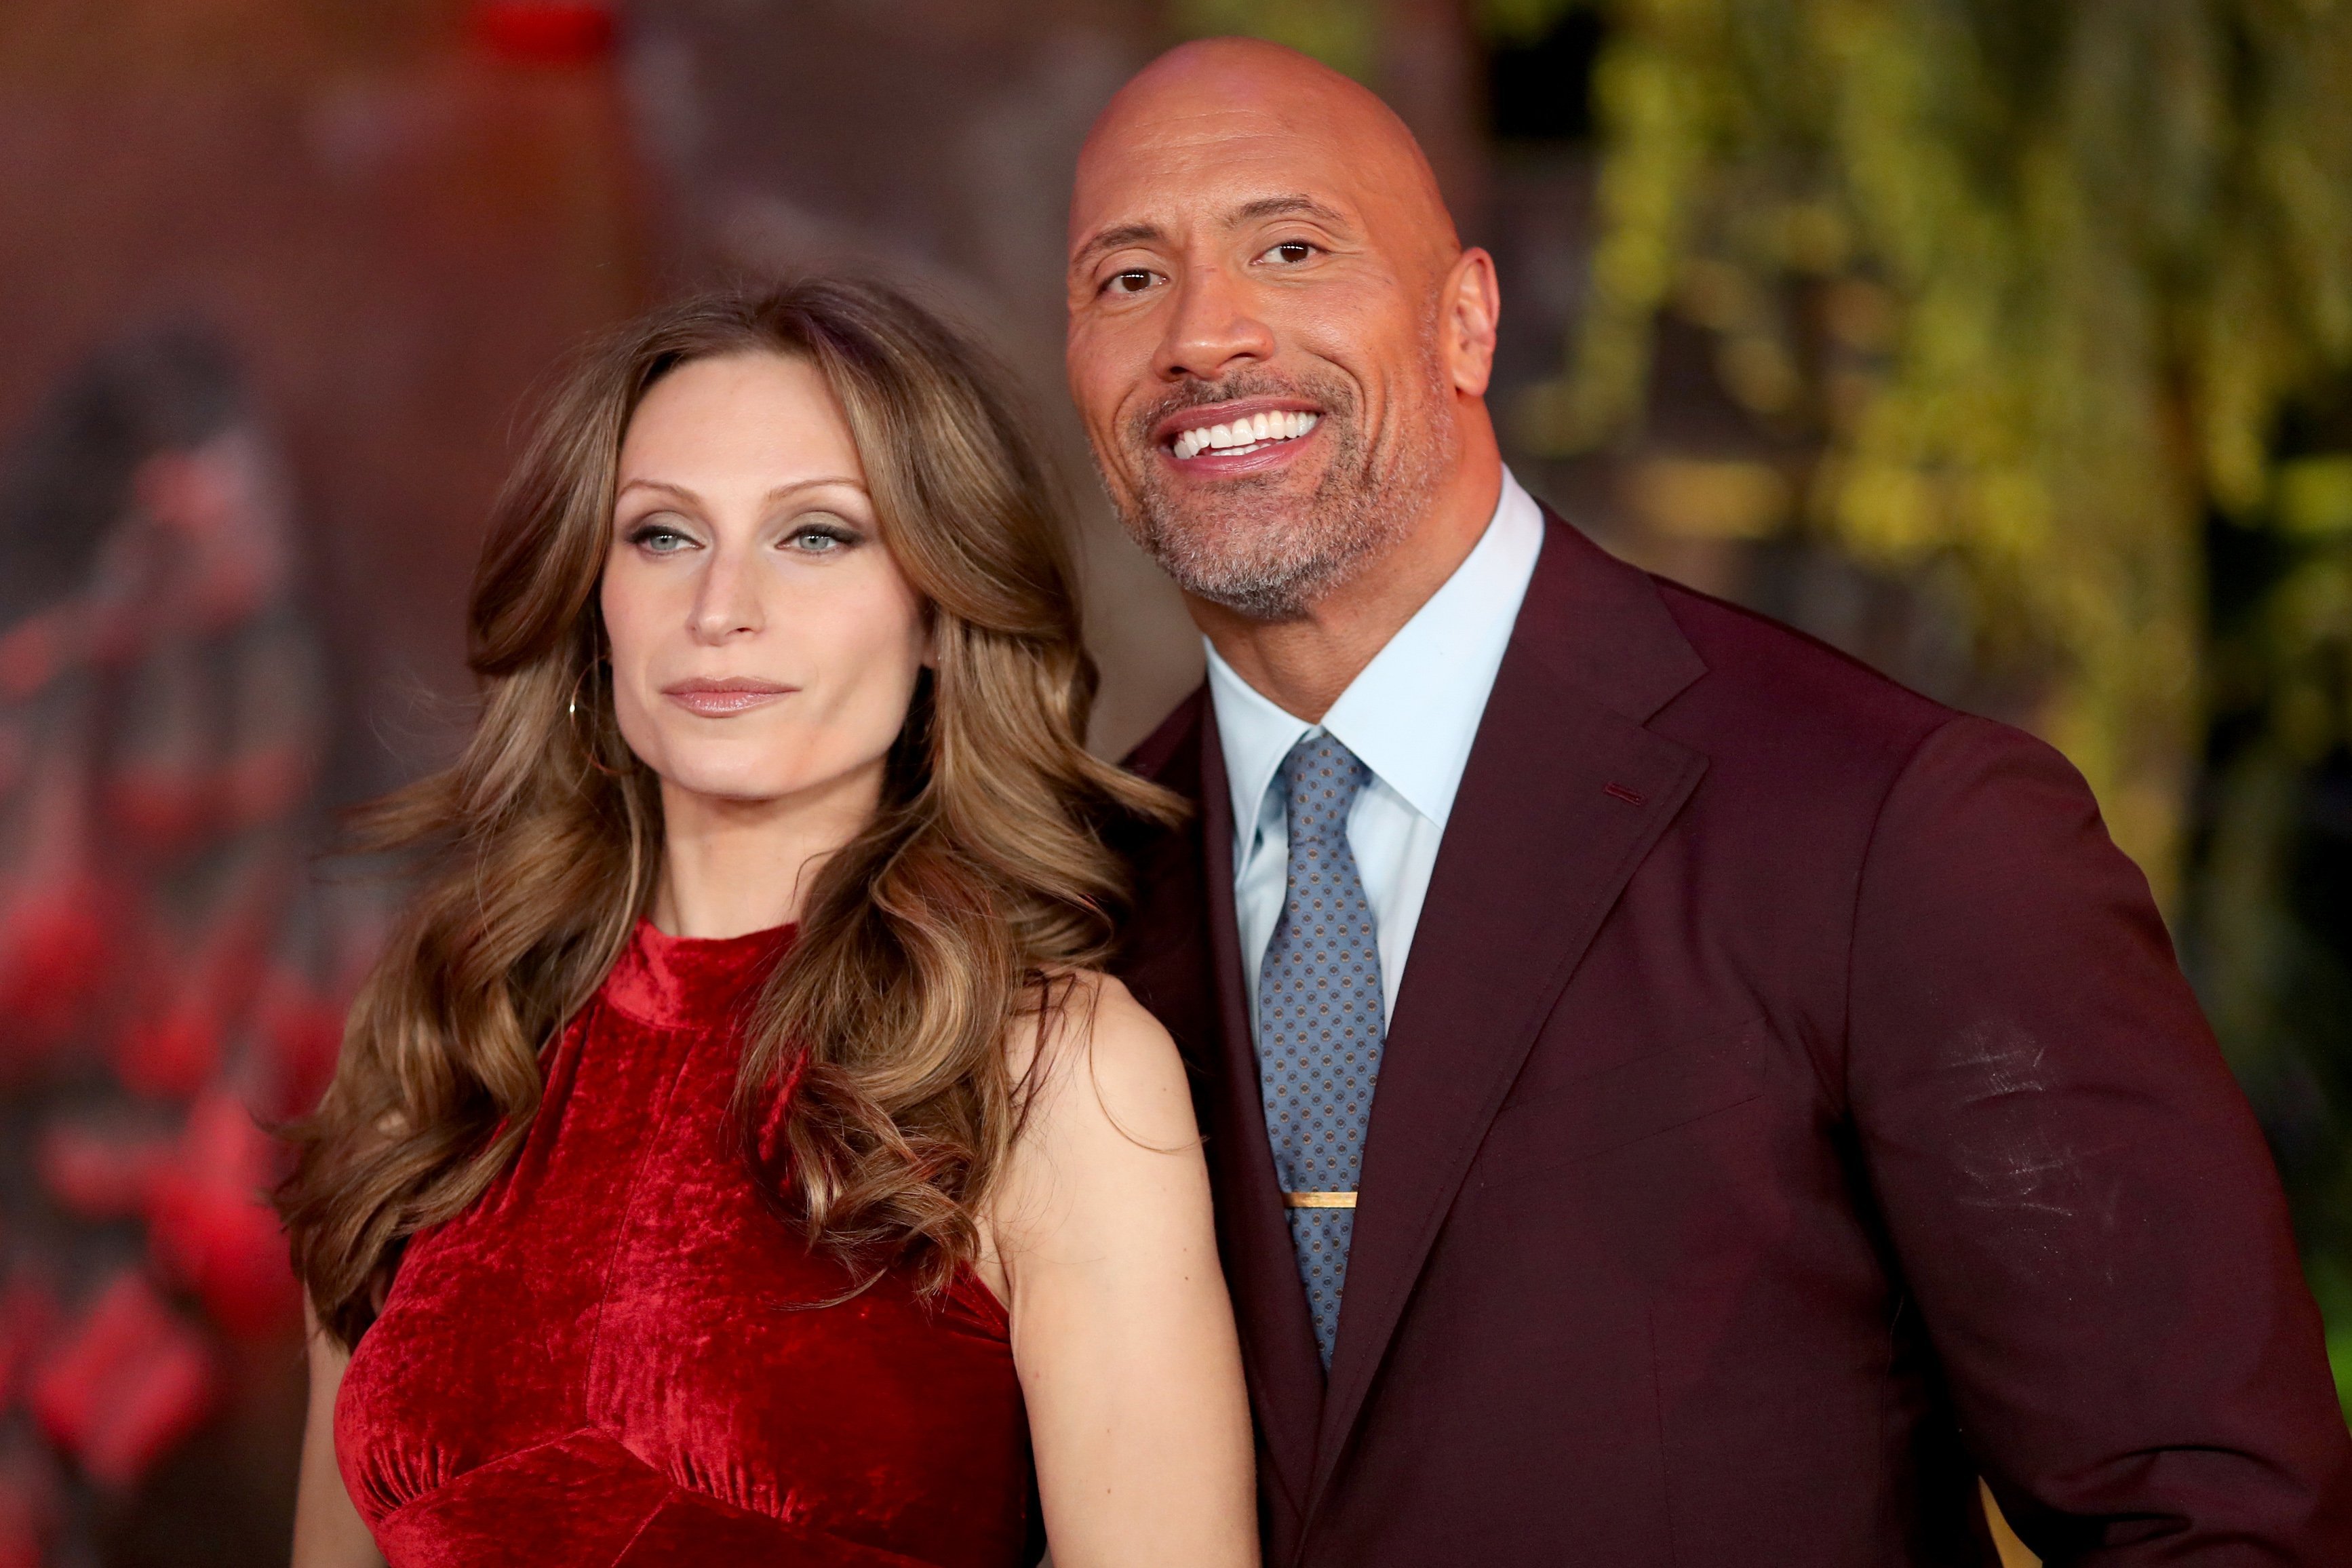 Lauren Hashian & Dwayne Johnson at the premiere of 'Jumanji Welcome To The Jungle' on Dec. 11, 2017 in Hollywood, California | Photo Getty Images